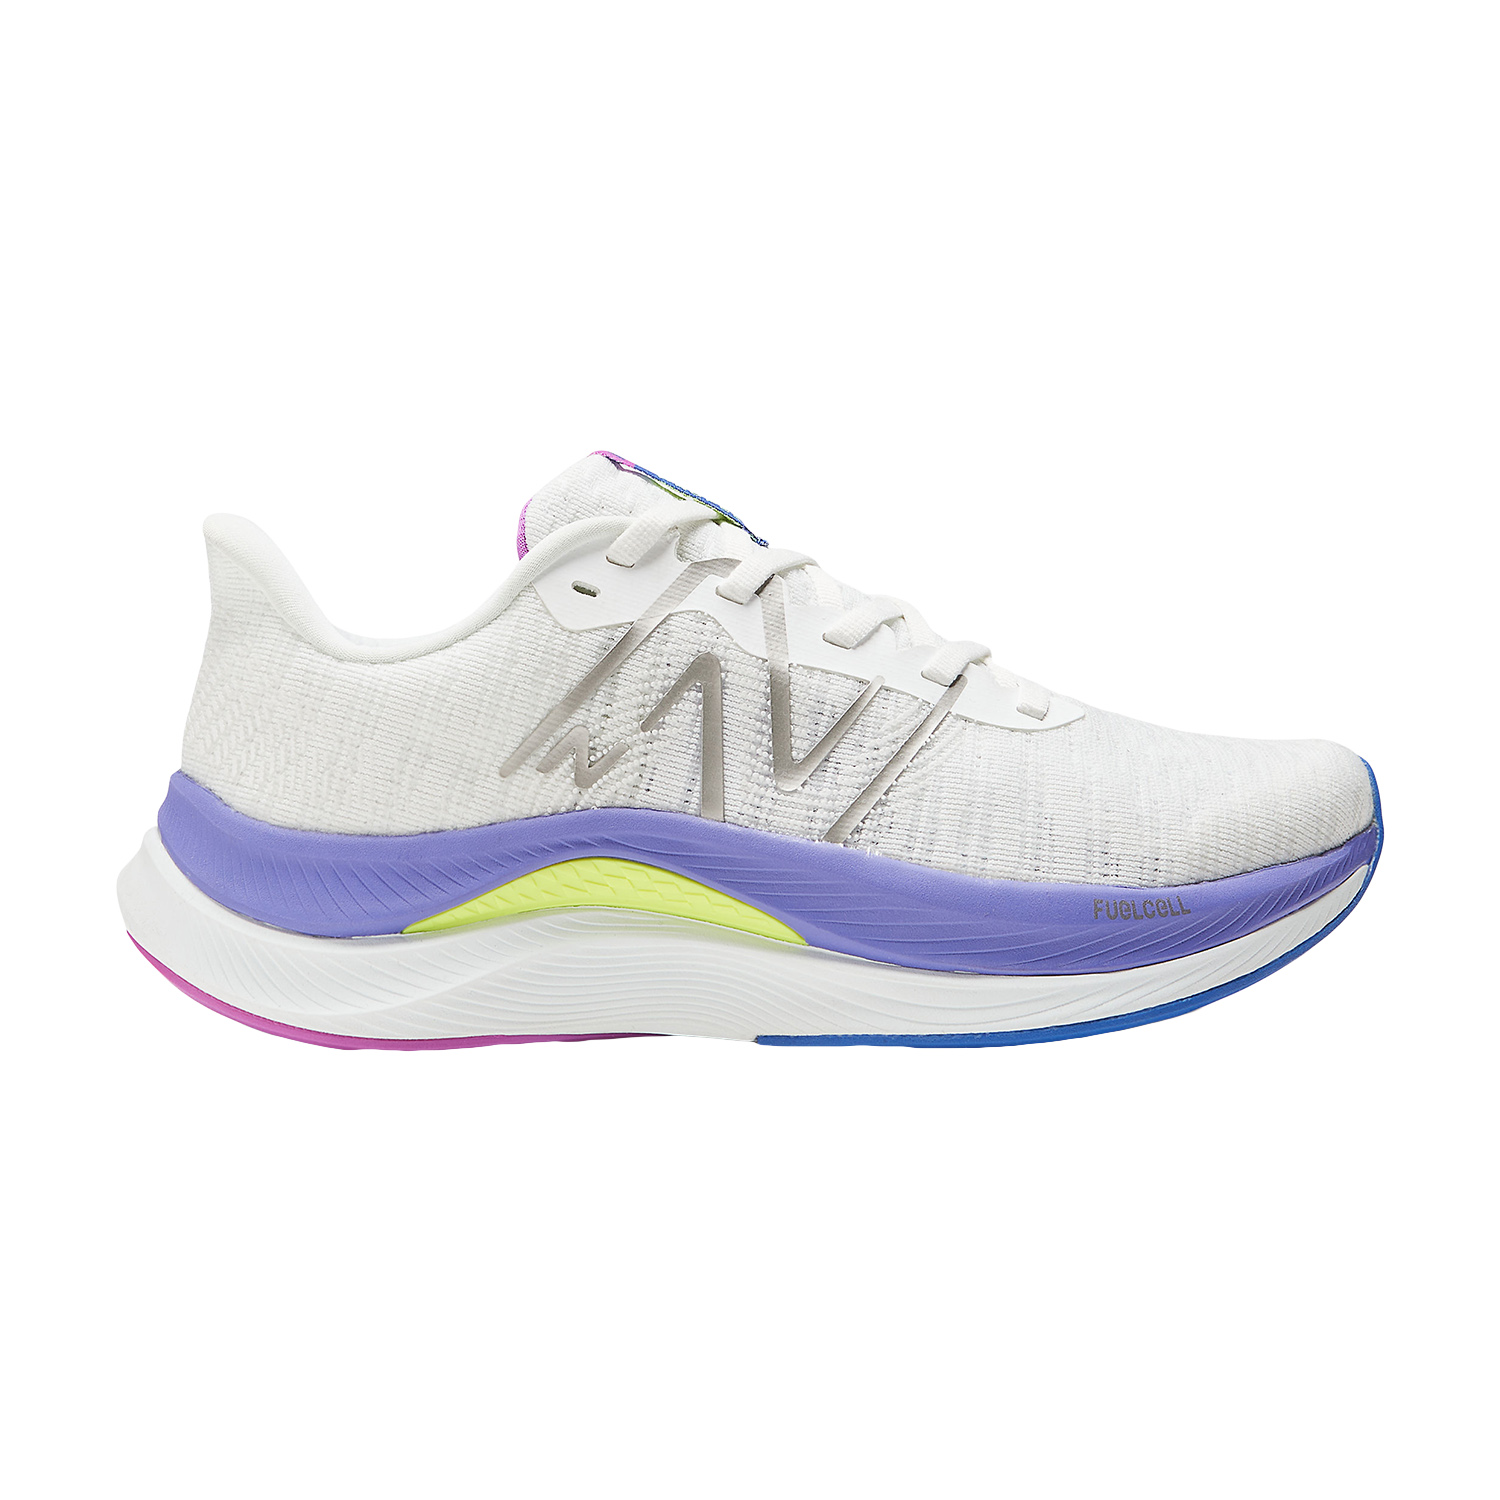 New Balance Fuelcell Propel v4 Women Running Shoes Neon Dragonfly